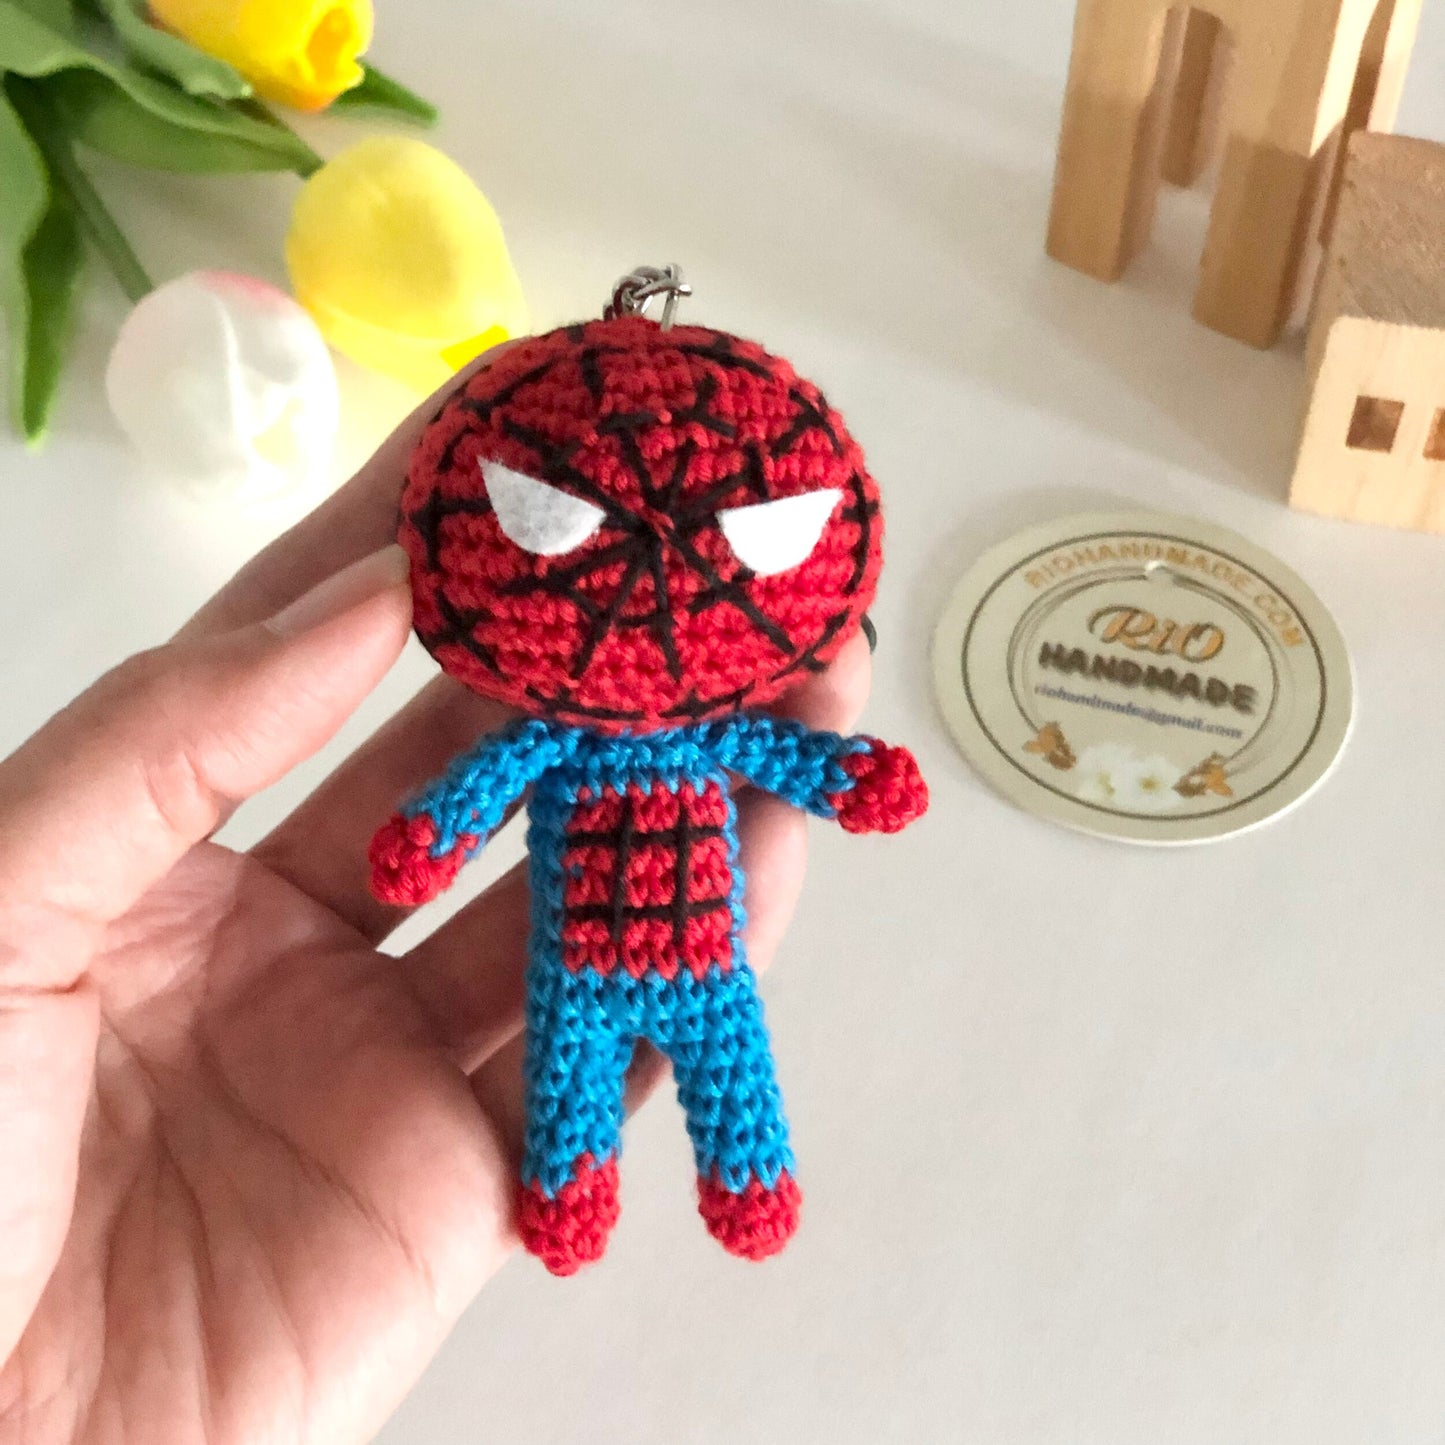 Ready To Ship, Handmade Mini Super Heroes inspired keychain, car rearview mirror charm, crochet spider man, gift, car hanging accessory